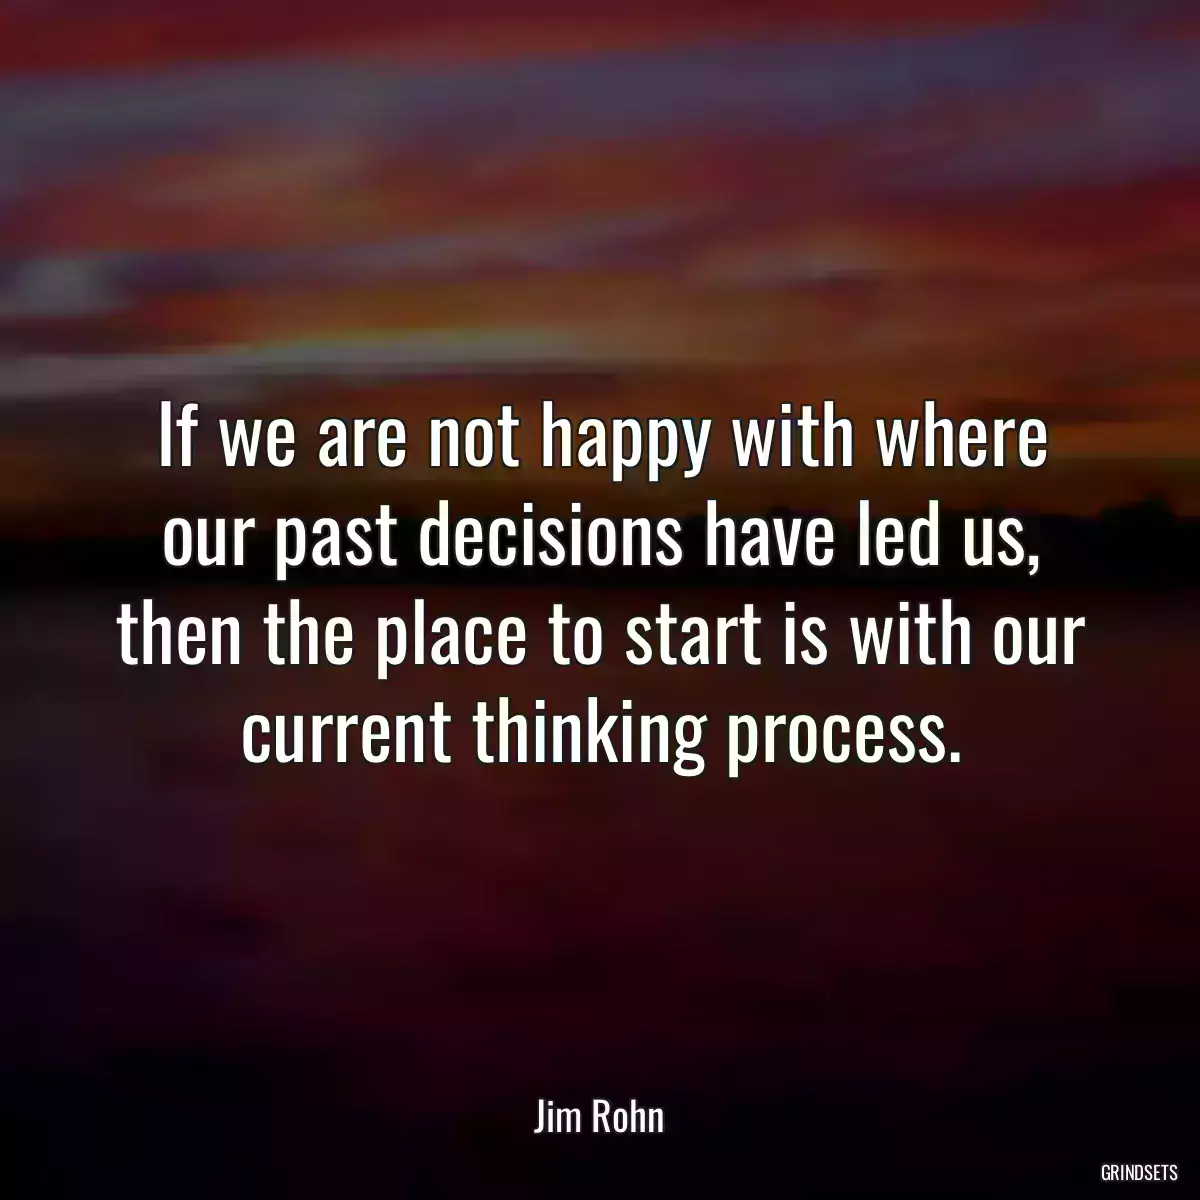 If we are not happy with where our past decisions have led us, then the place to start is with our current thinking process.